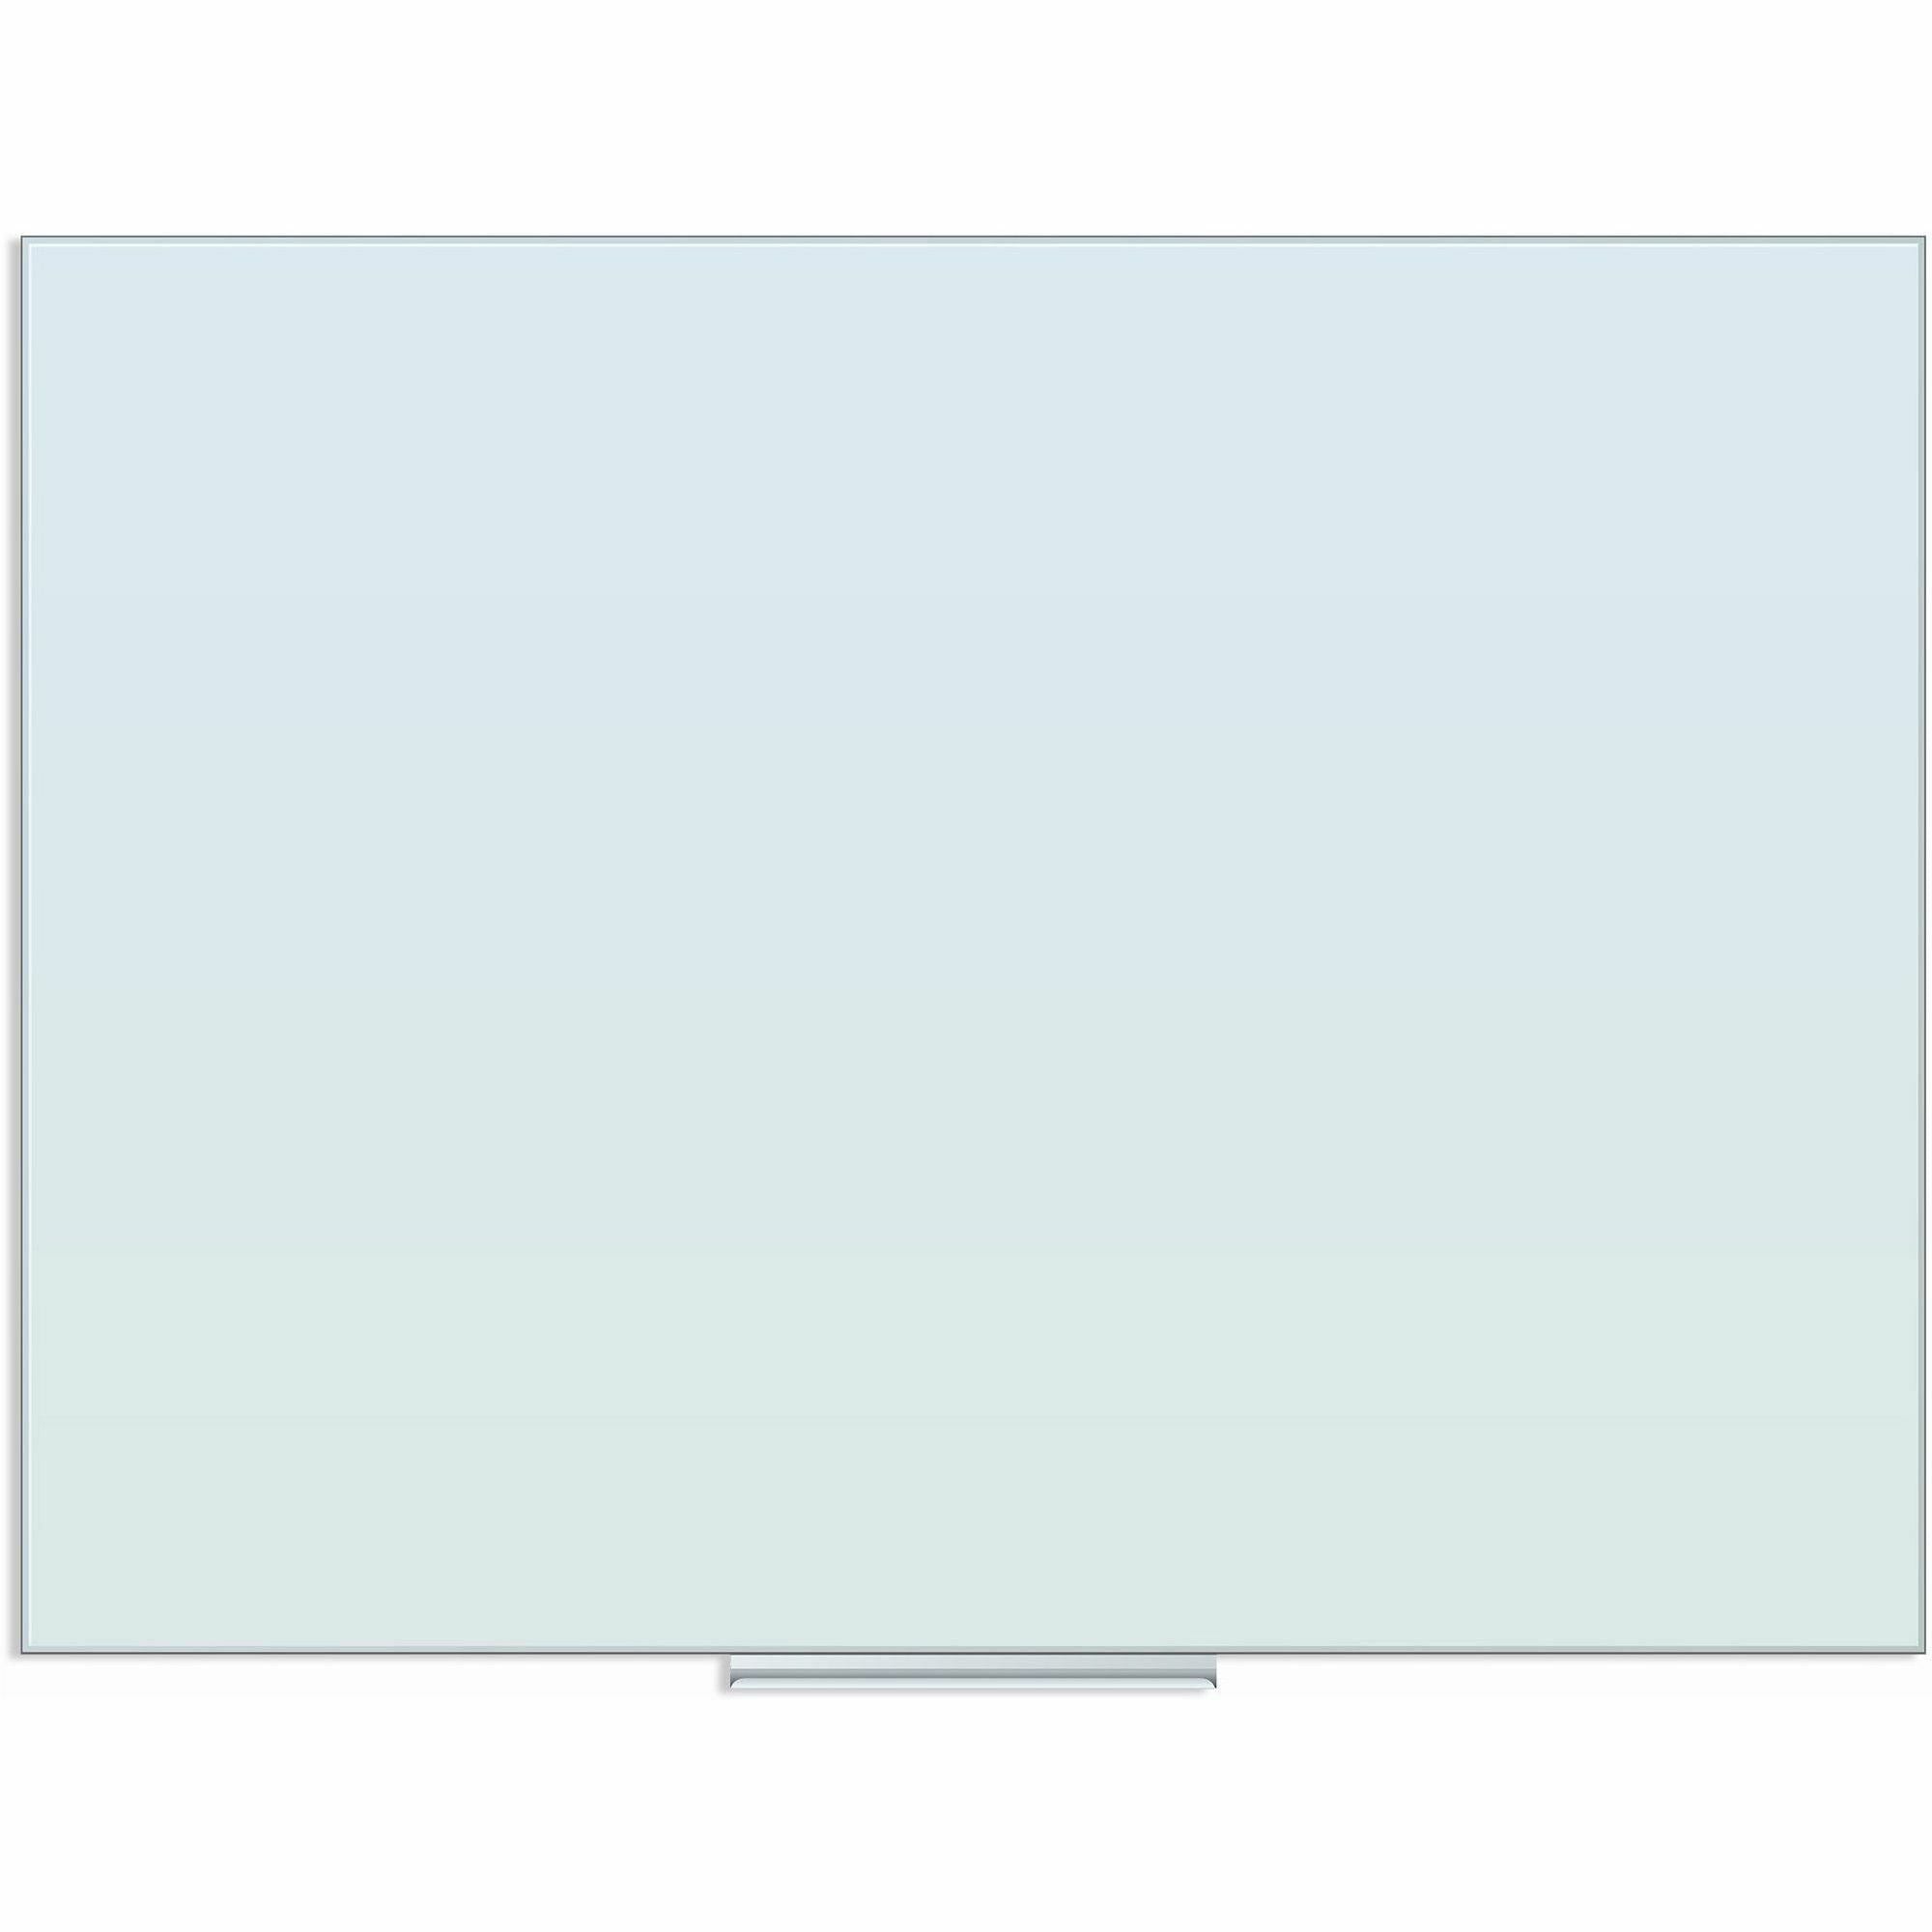 u-brands-floating-glass-dry-erase-board-35-29-ft-width-x-47-39-ft-height-frosted-white-tempered-glass-surface-rectangle-horizontal-vertical-1-each_ubr2778u0001 - 1